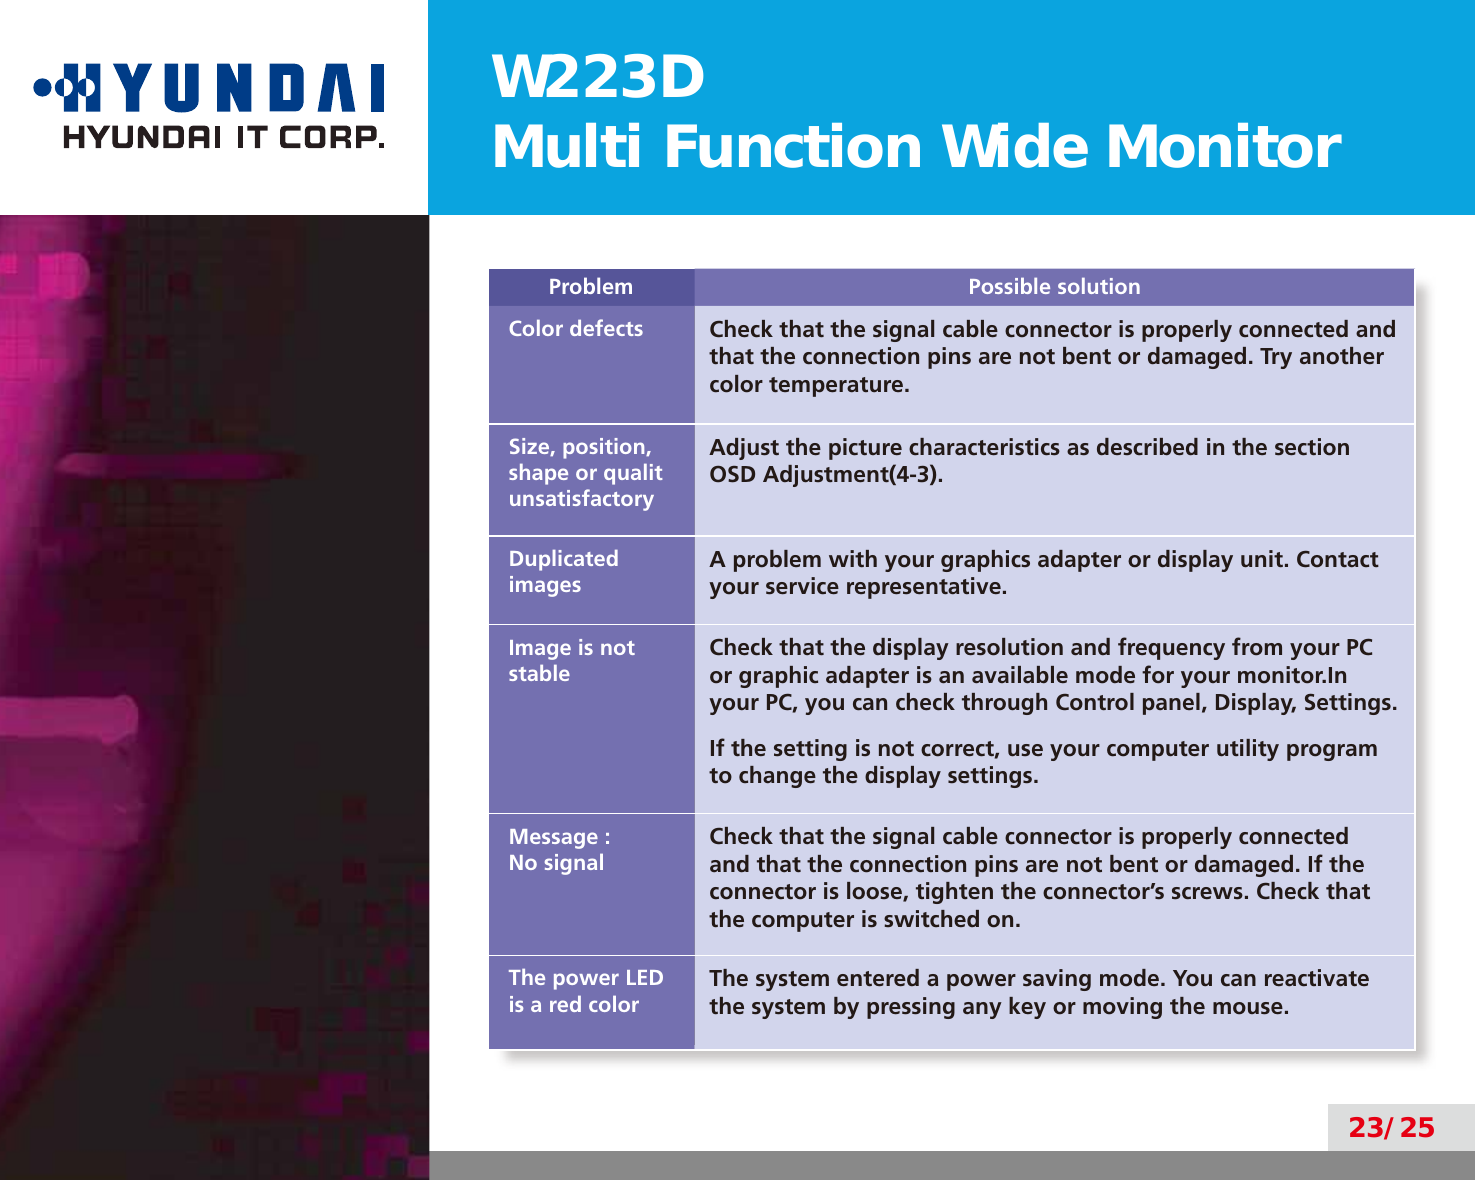 W223DMulti Function Wide Monitor23/25Problem Possible solutionColor defects Check that the signal cable connector is properly connected and that the connection pins are not bent or damaged. Try another color temperature. Size, position, shape or qualit unsatisfactoryAdjust the picture characteristics as described in the section OSD Adjustment(4-3).Duplicated imagesA problem with your graphics adapter or display unit. Contact your service representative.Image is not stableCheck that the display resolution and frequency from your PC or graphic adapter is an available mode for your monitor.In your PC, you can check through Control panel, Display, Settings.If the setting is not correct, use your computer utility program to change the display settings.Message :No signalCheck that the signal cable connector is properly connected and that the connection pins are not bent or damaged. If the connector is loose, tighten the connector’s screws. Check that the computer is switched on.The power LED is a red color The system entered a power saving mode. You can reactivate the system by pressing any key or moving the mouse.